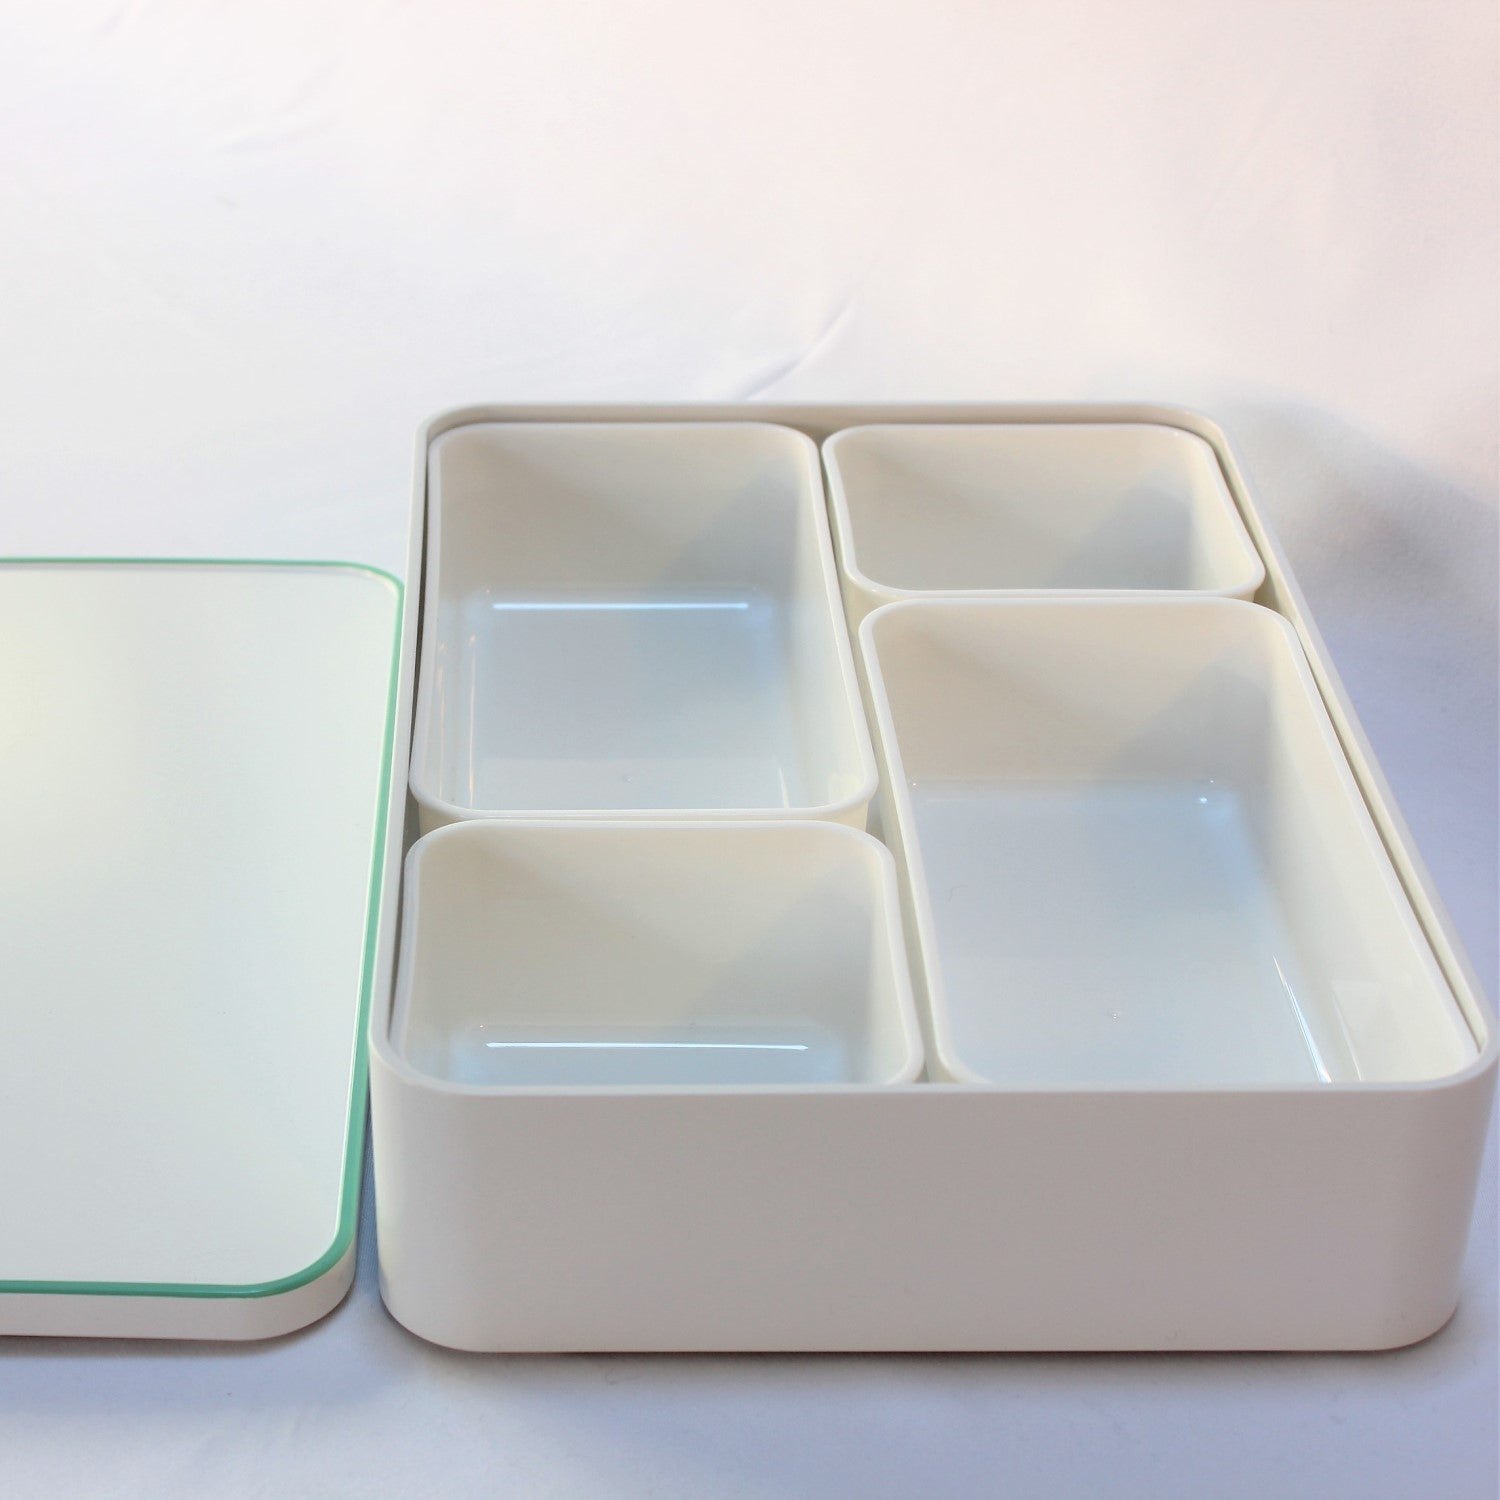 Majime Life Wakaba 1 tier picnic bento box from Japan with 4 inner containers